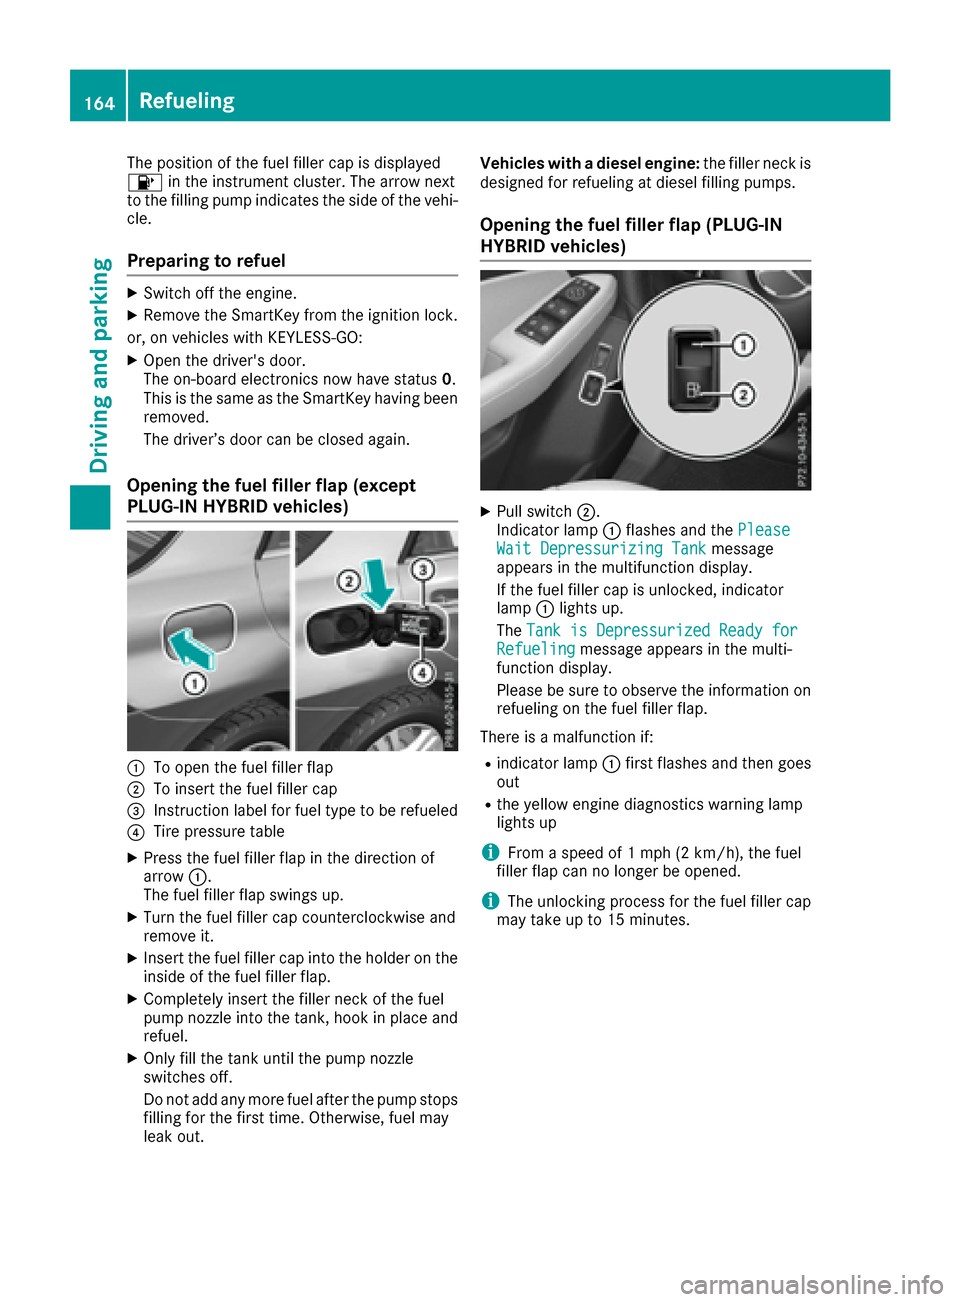 MERCEDES-BENZ GLE-Class 2016 W218 Owners Manual The position of the fuel filler cap is displayed
8in the instrument cluster. The arrow next
to the filling pump indicates the side of the vehi-
cle.
Preparing to refuel
XSwitch off the engine.
XRemove